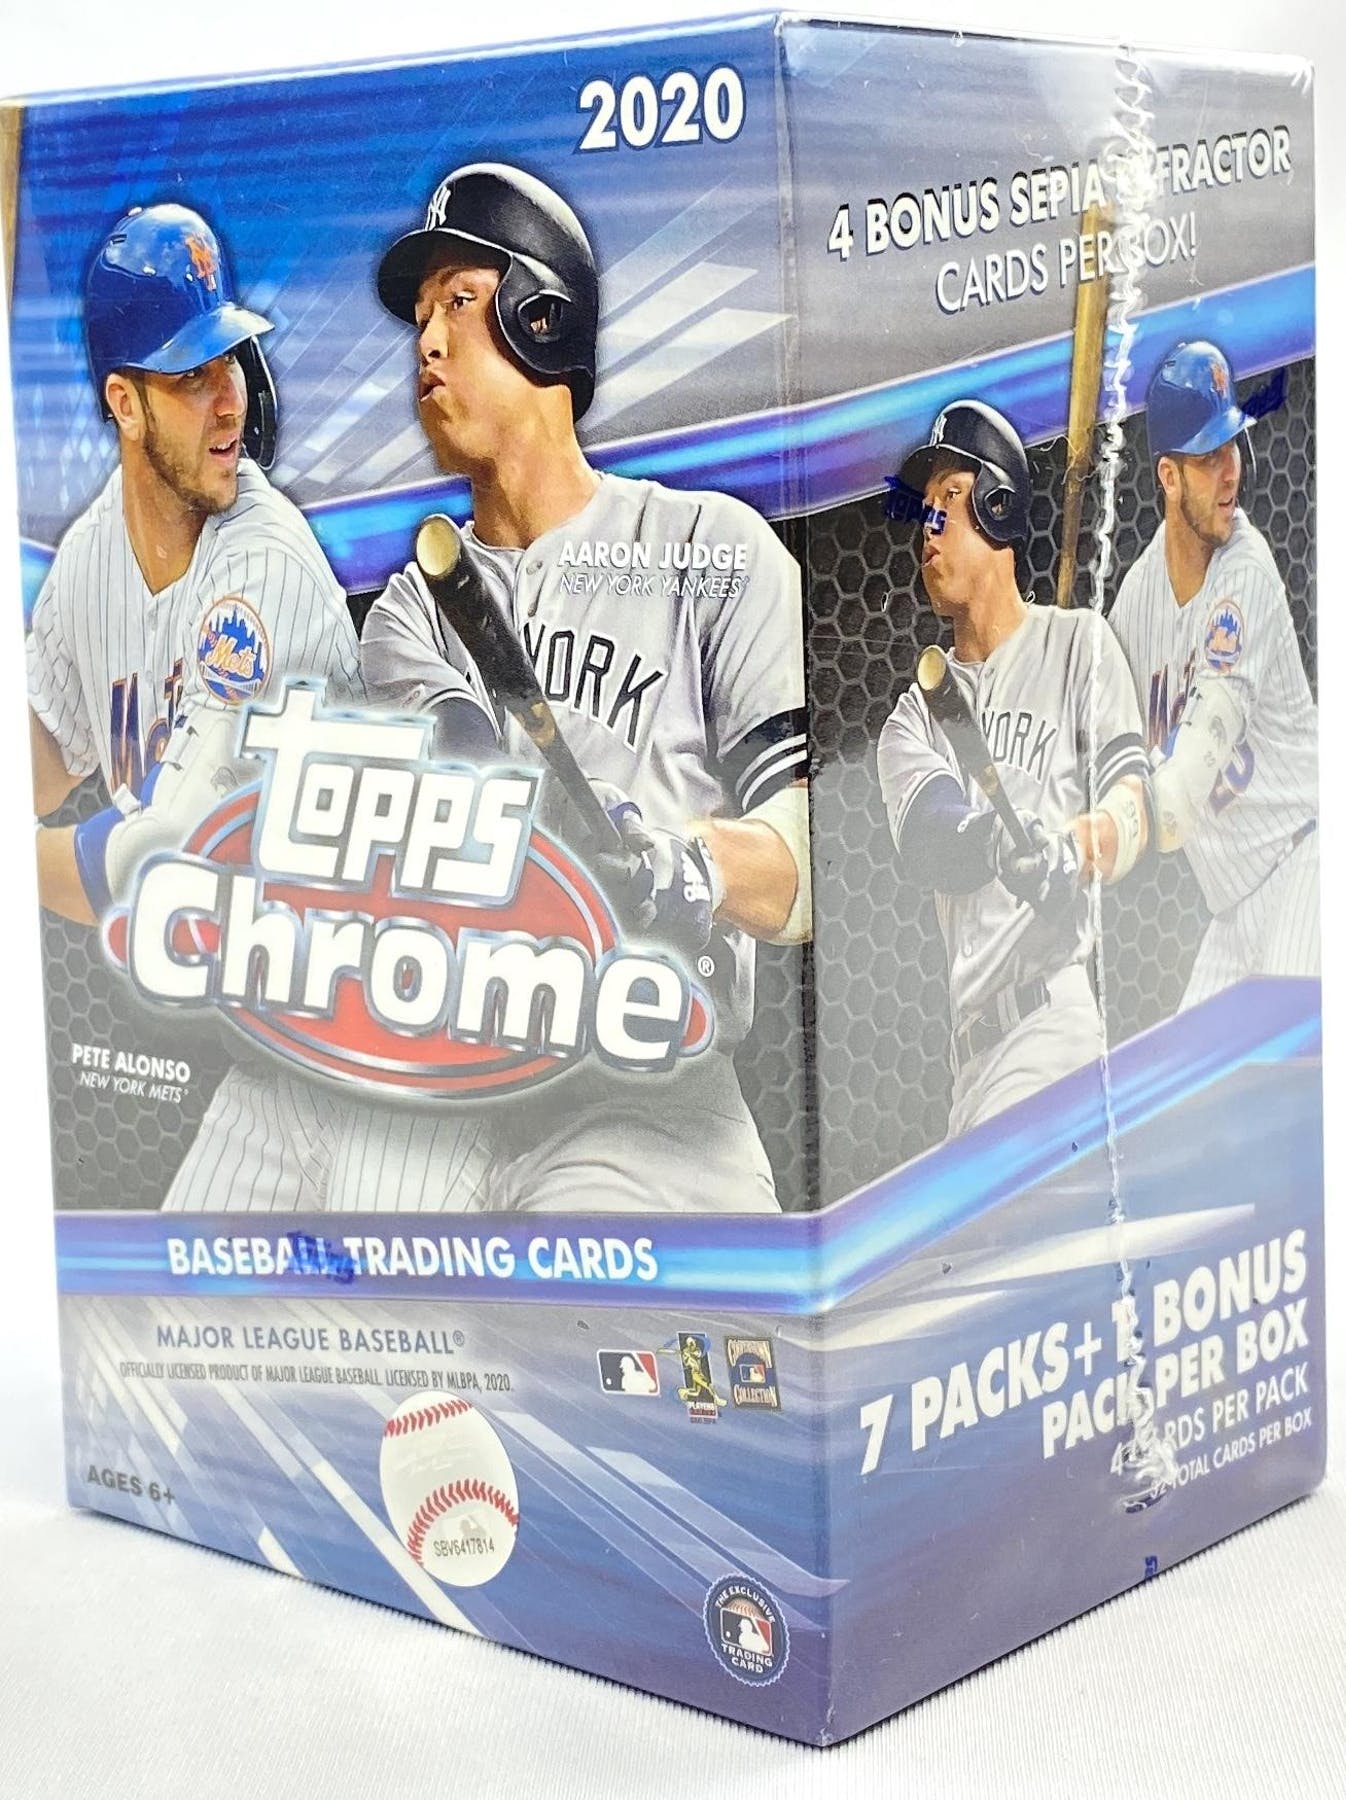 Aaron Judge Cards (5) - Assorted New York Yankees Baseball Card Bundle,  Collectible Trading Cards